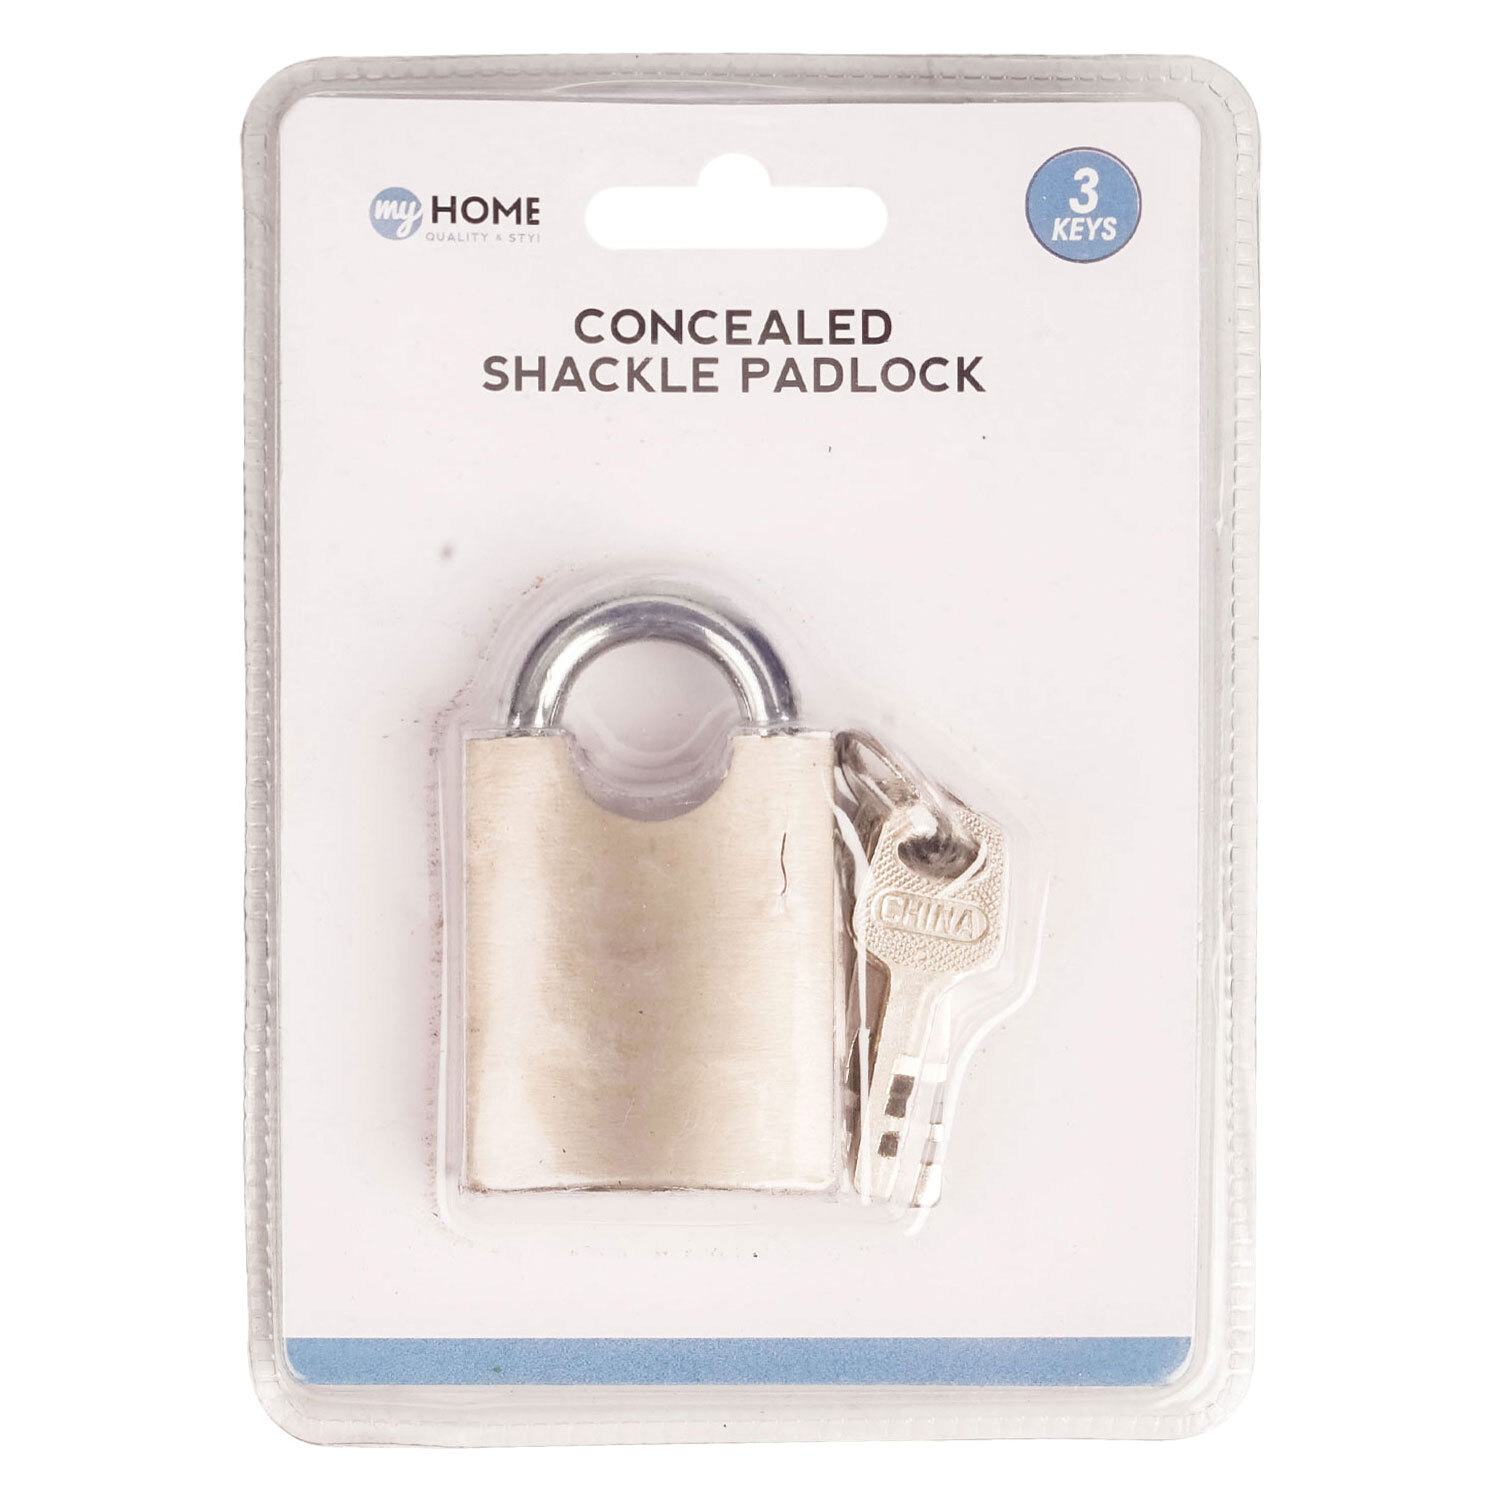 My Home 65mm Chrome Concealed Shackle Padlock with 3 Keys Image